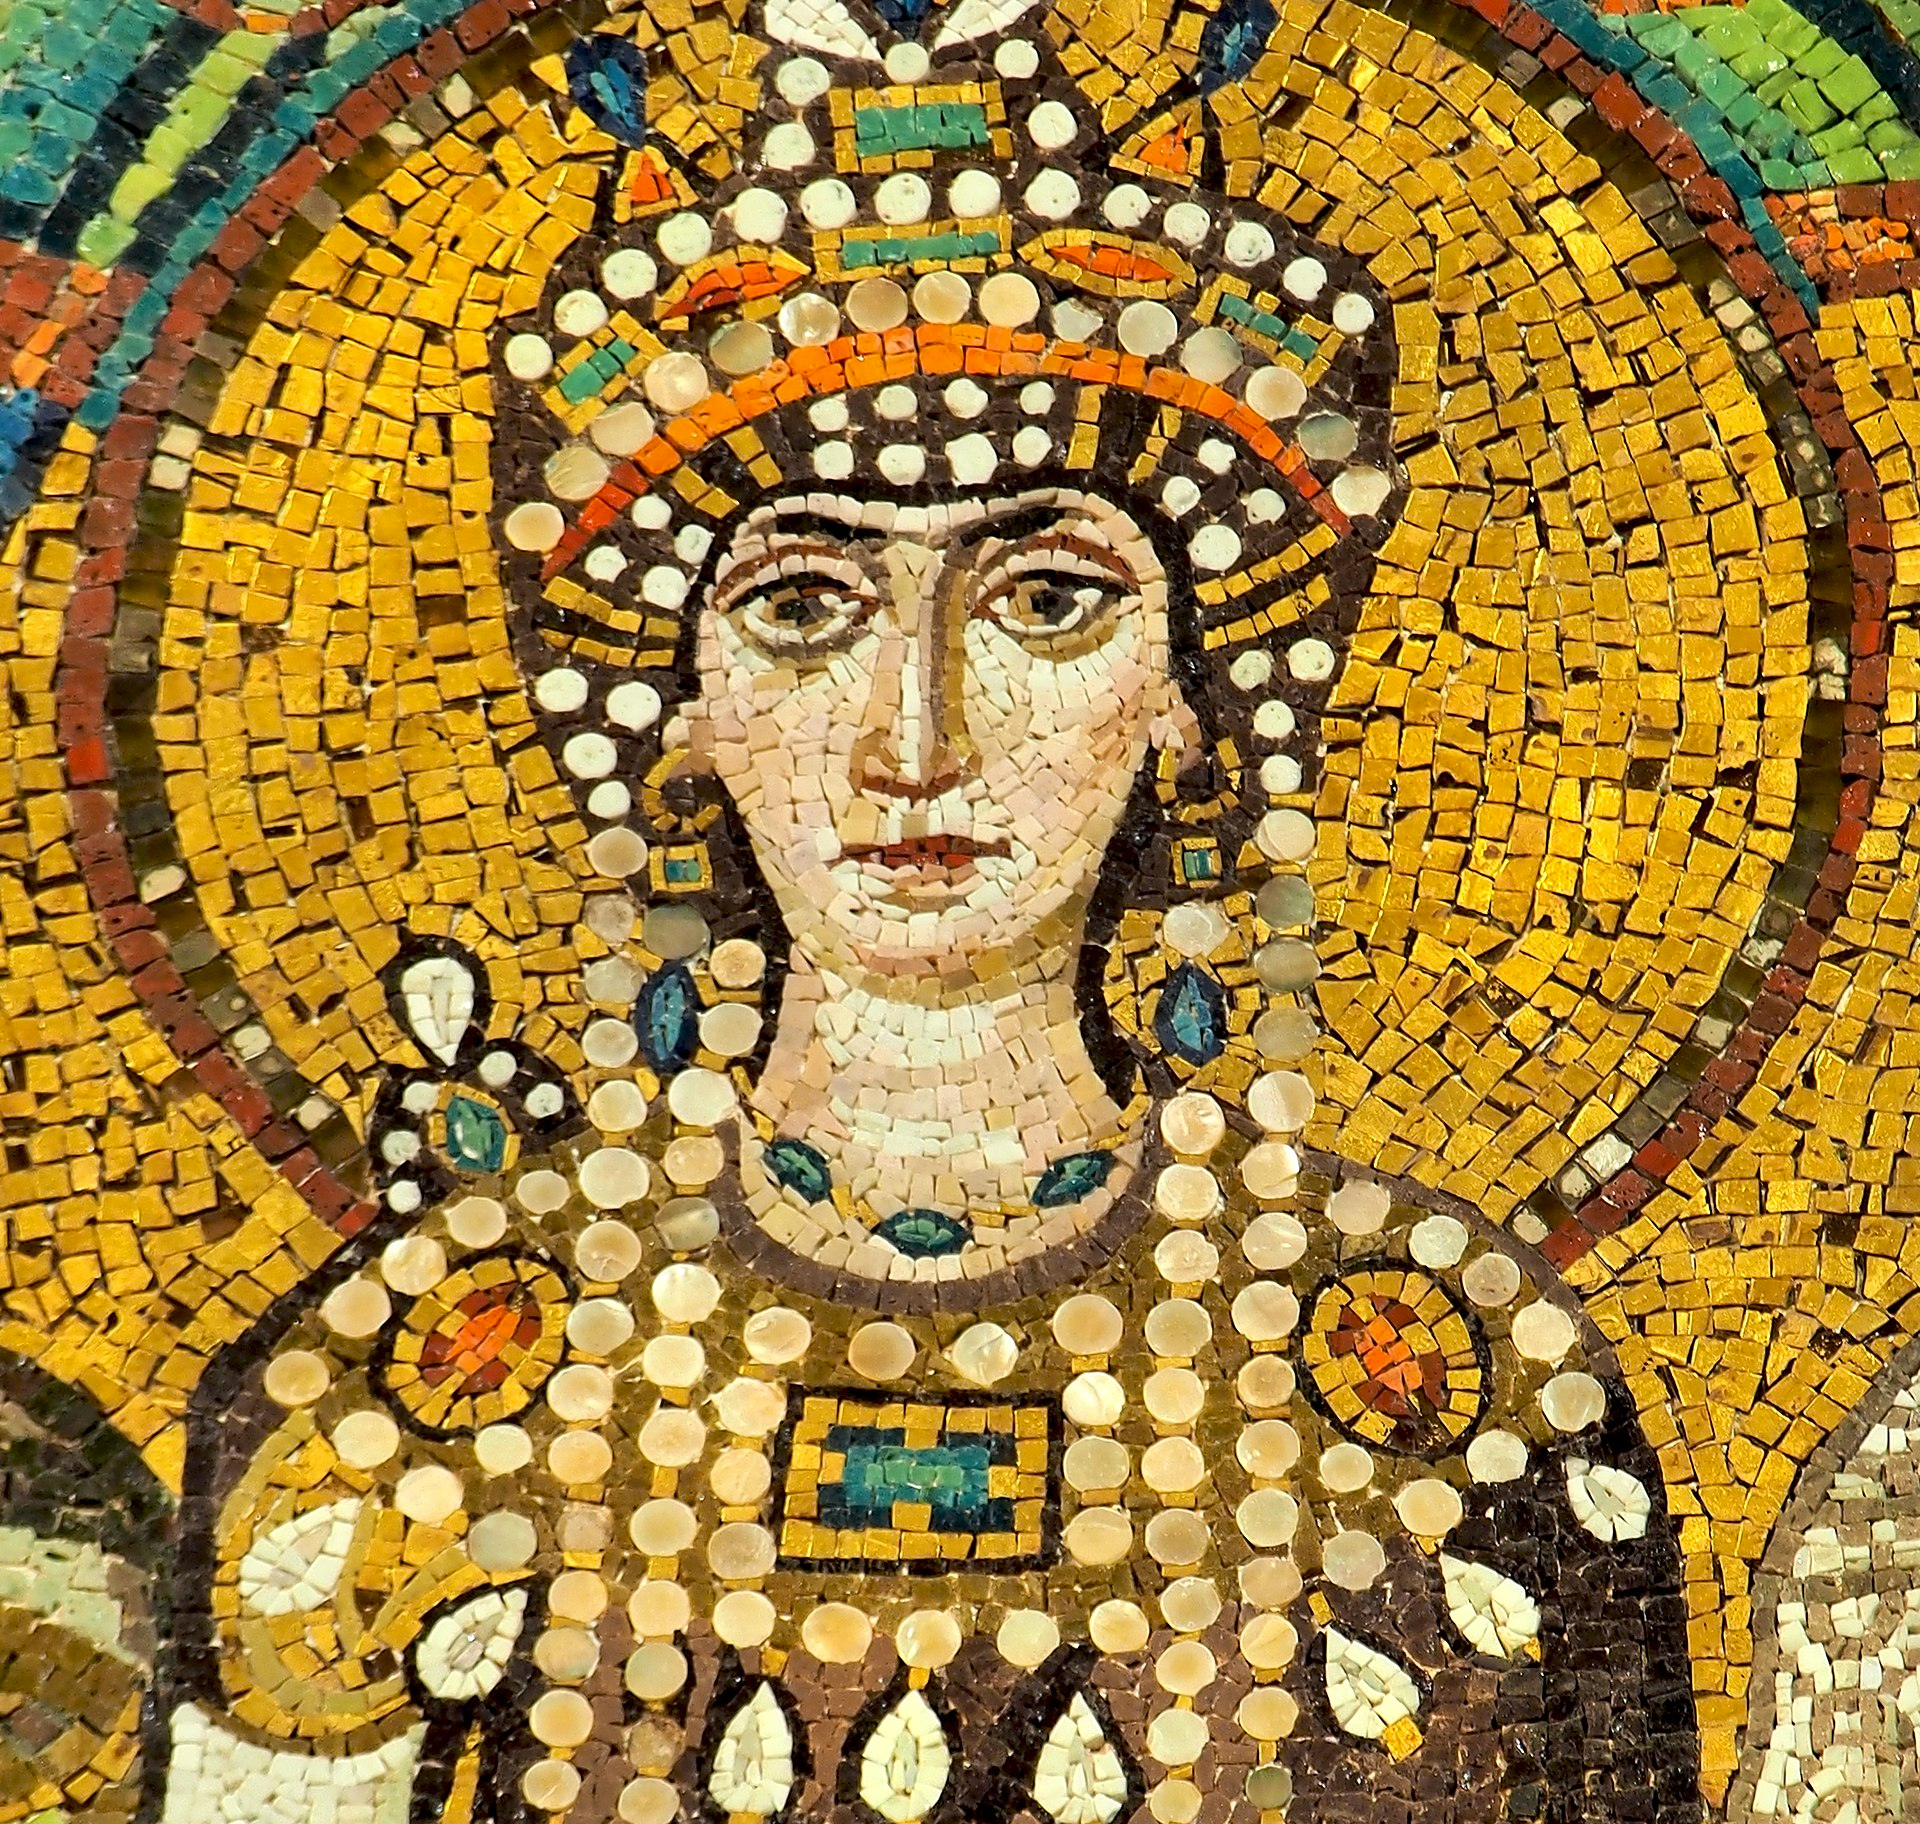 An antique mosaic of Empress Theodora in the Byzantine style. Theodora is shown with dark hair and eyes, fully dressed in jewellery including a pearl headpiece.